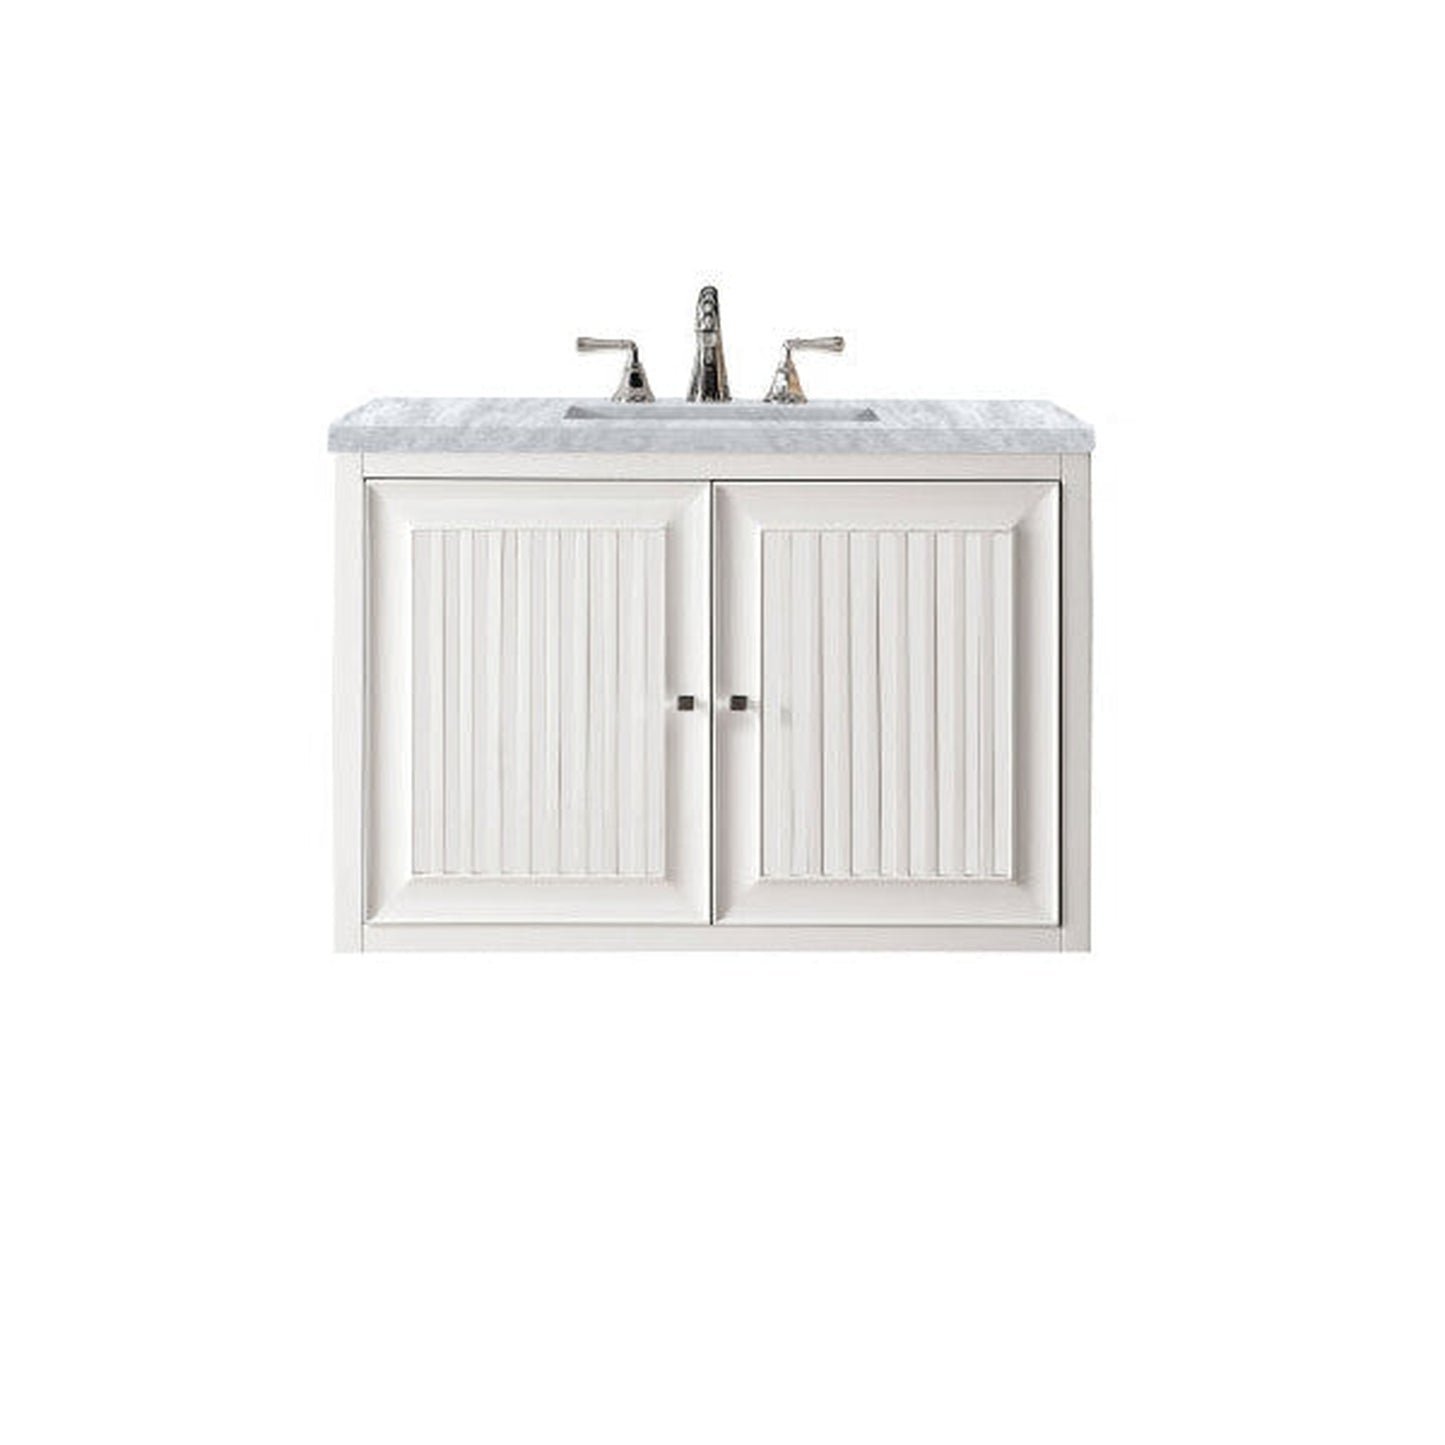 James Martin Athens 36" Single Glossy White Bathroom Vanity With 1" Carrara White Marble Top and Rectangular Ceramic Sink